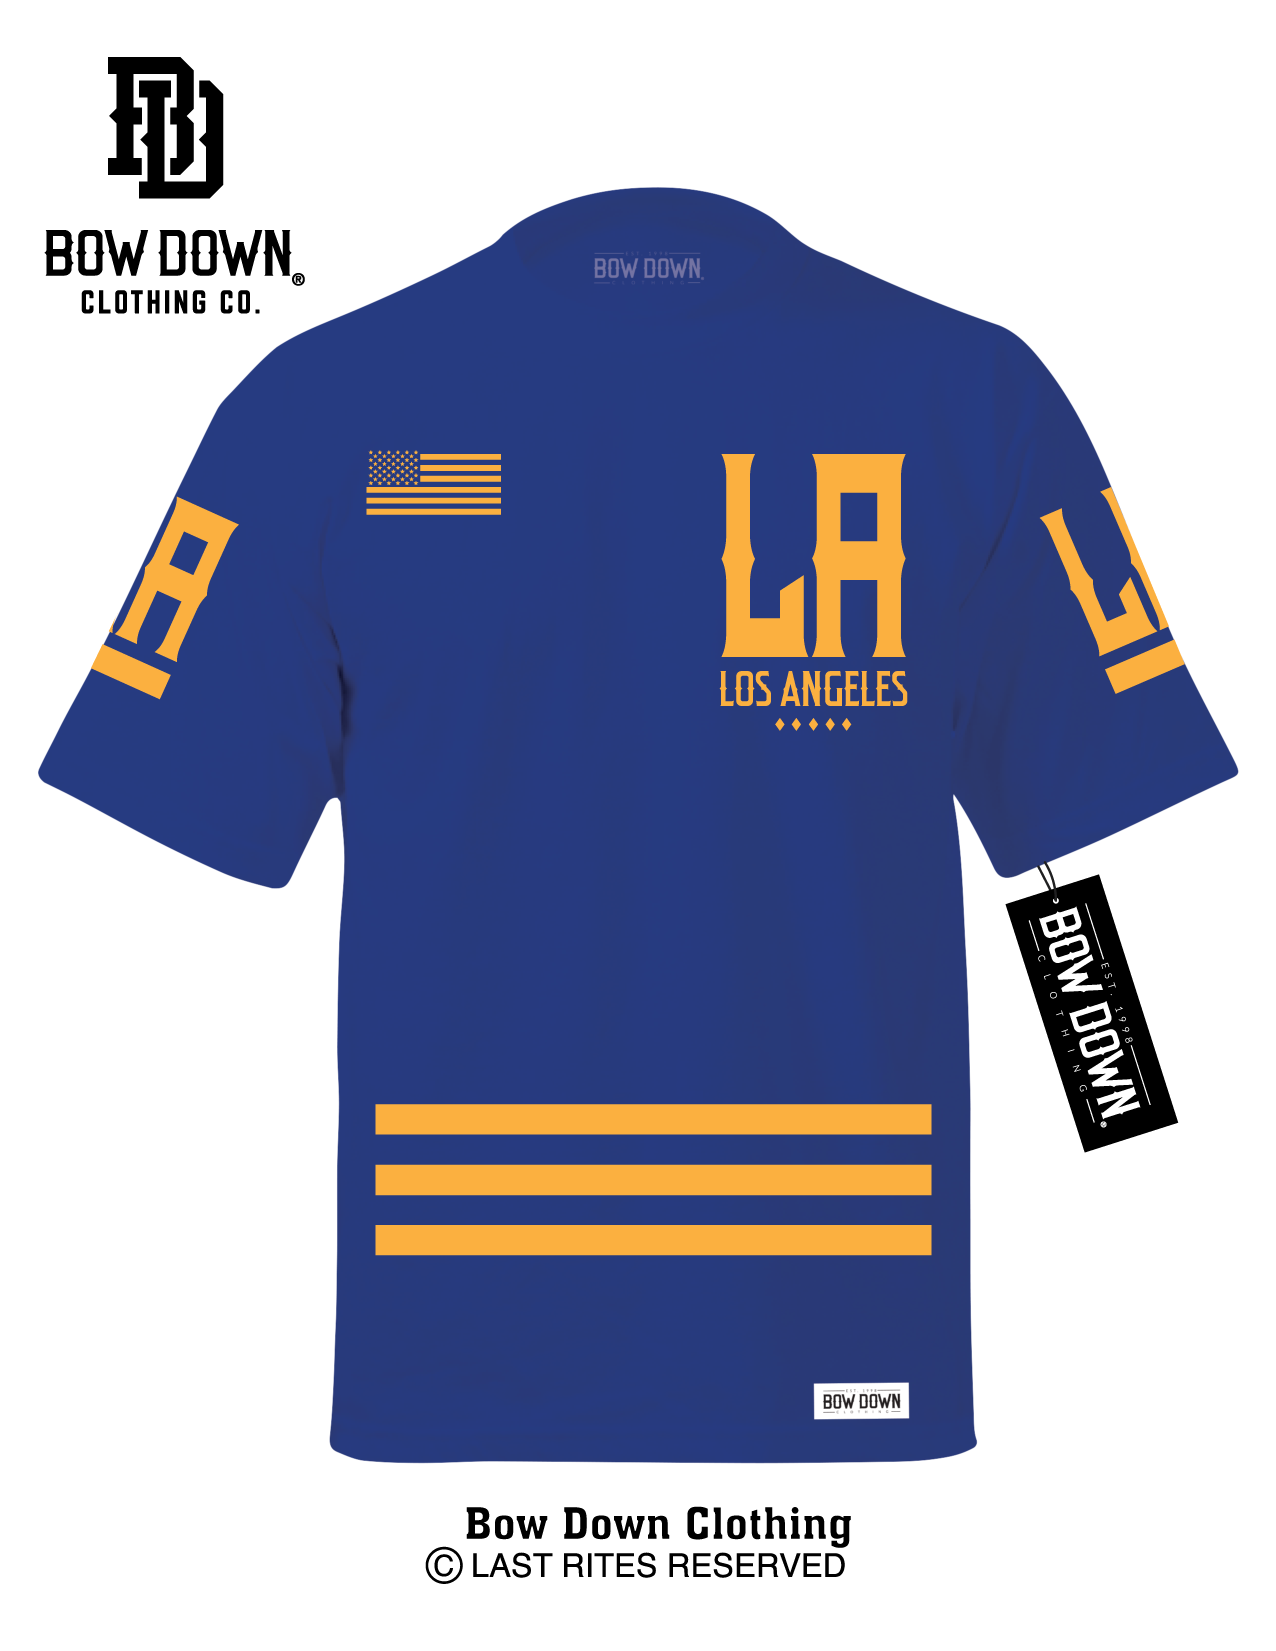 LOS ANGELES JERSEY - GOLD ON ROYAL BLUE T-SHIRT – BWDWN